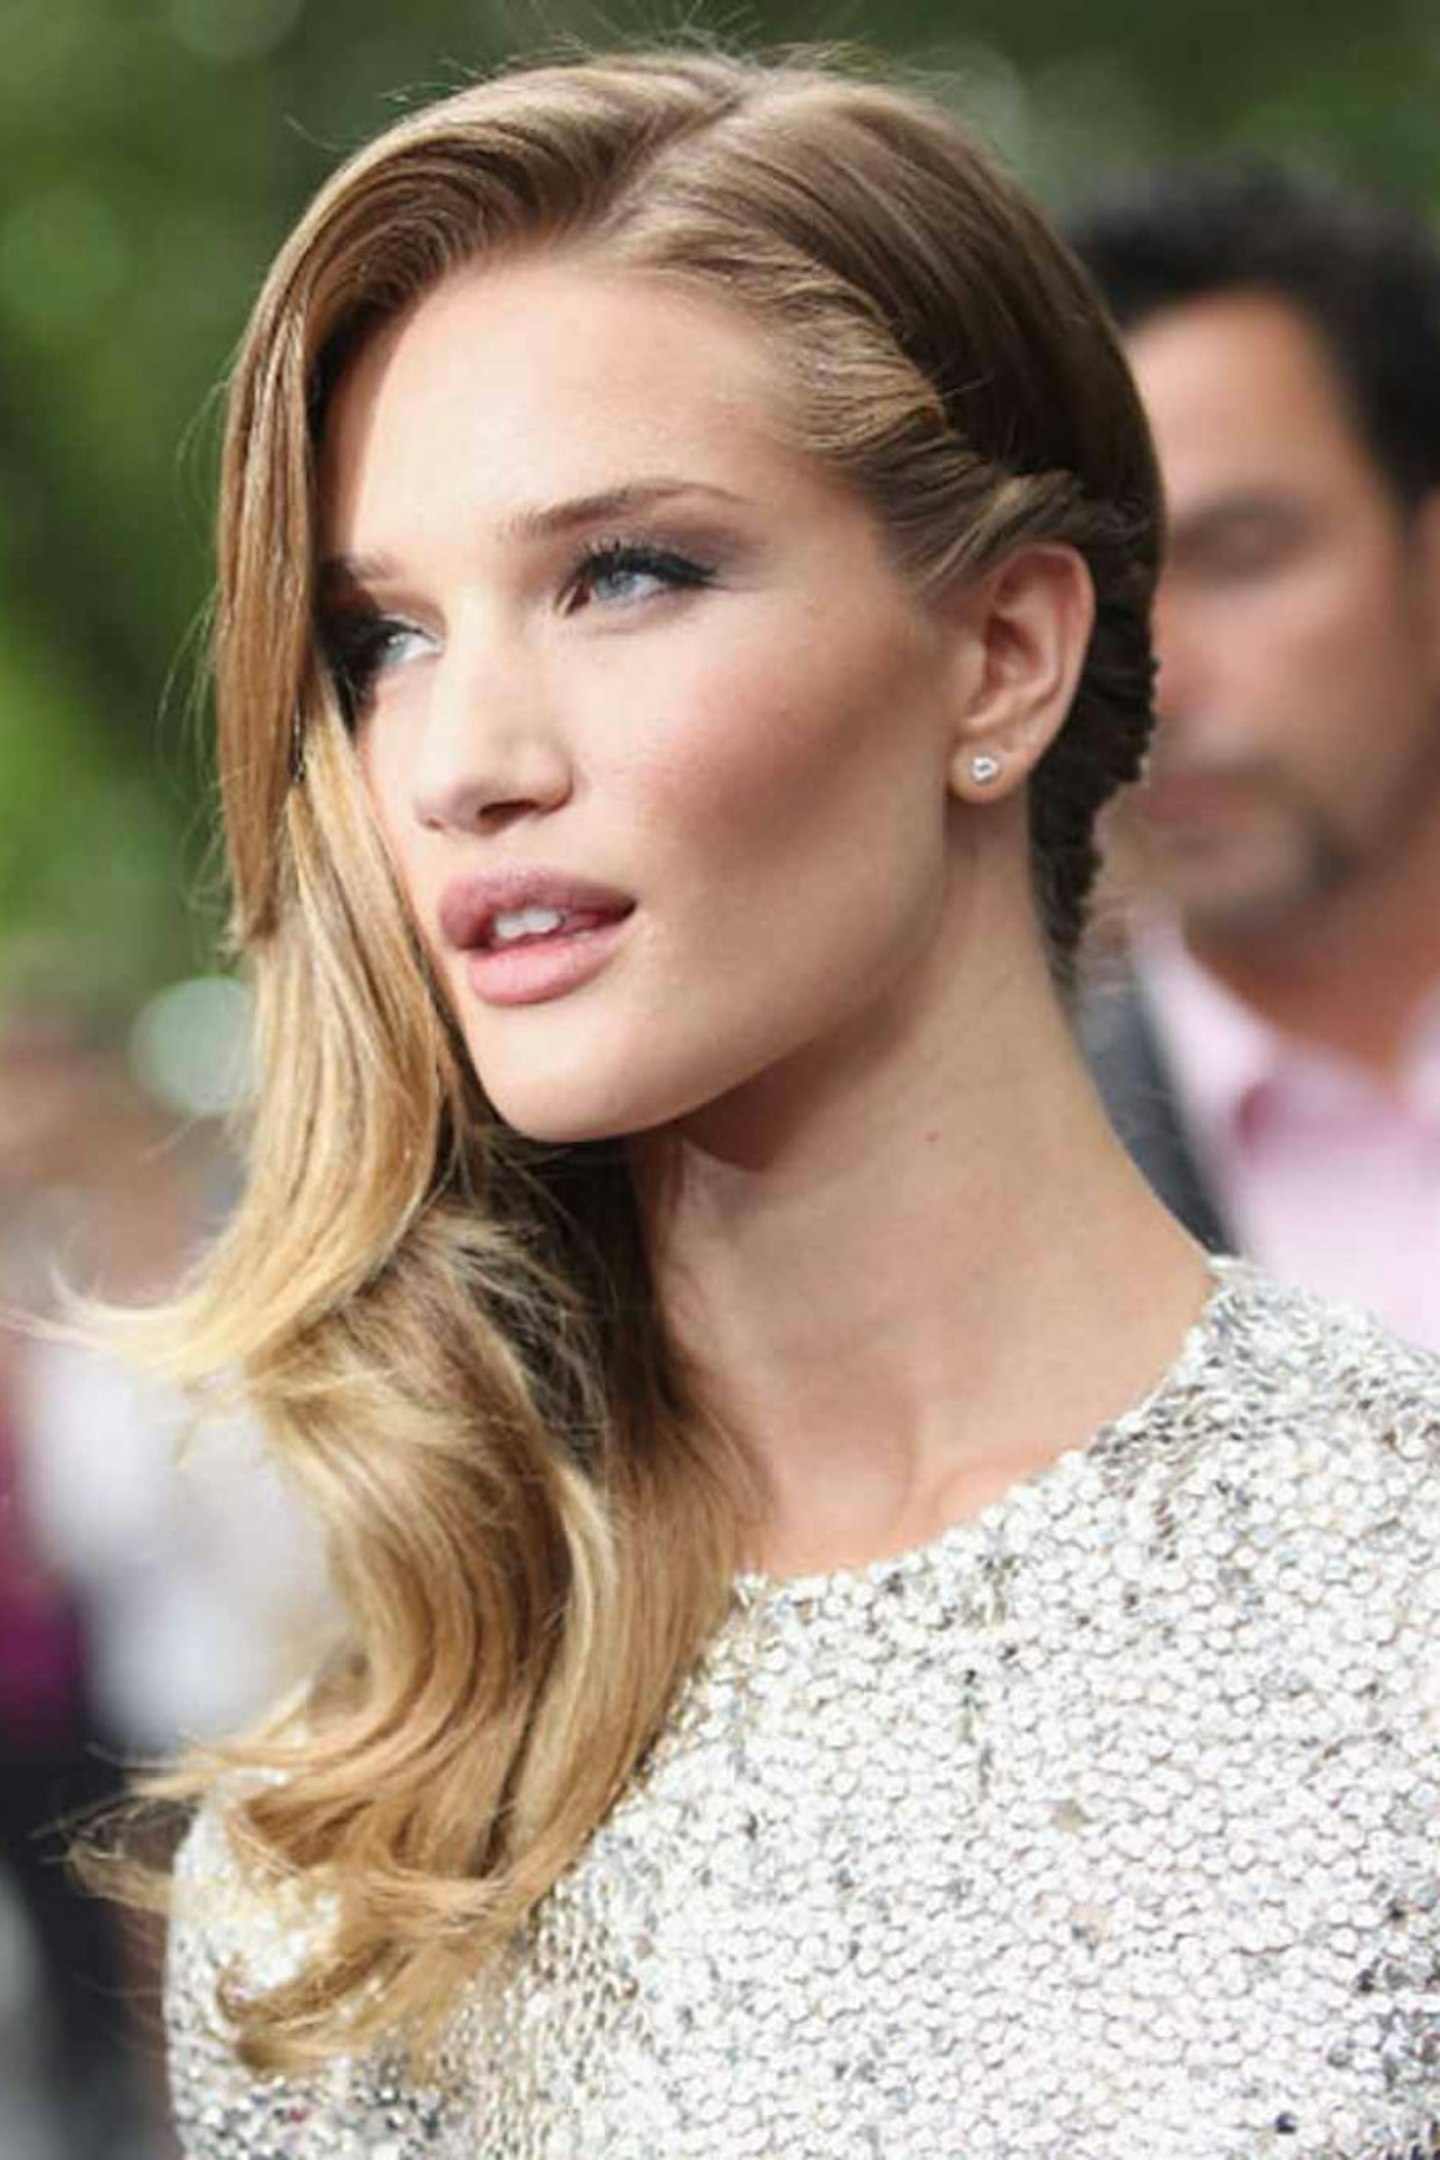 GALLERY >> The Many Faces of RHW